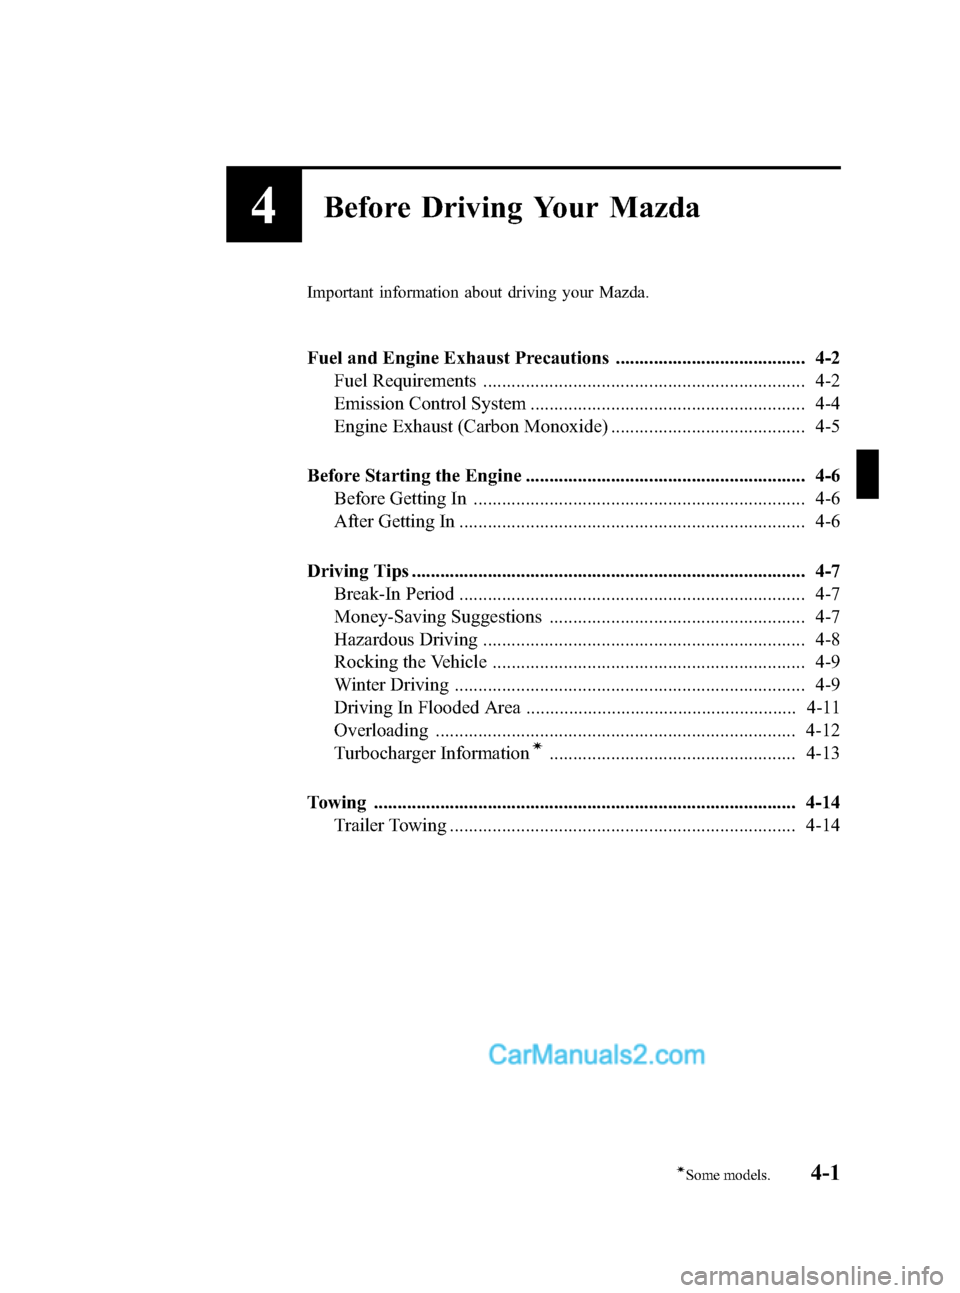 MAZDA MODEL MAZDASPEED 3 2007  Owners Manual (in English) Black plate (109,1)
4Before Driving Your Mazda
Important information about driving your Mazda.
Fuel and Engine Exhaust Precautions ........................................ 4-2
Fuel Requirements ......